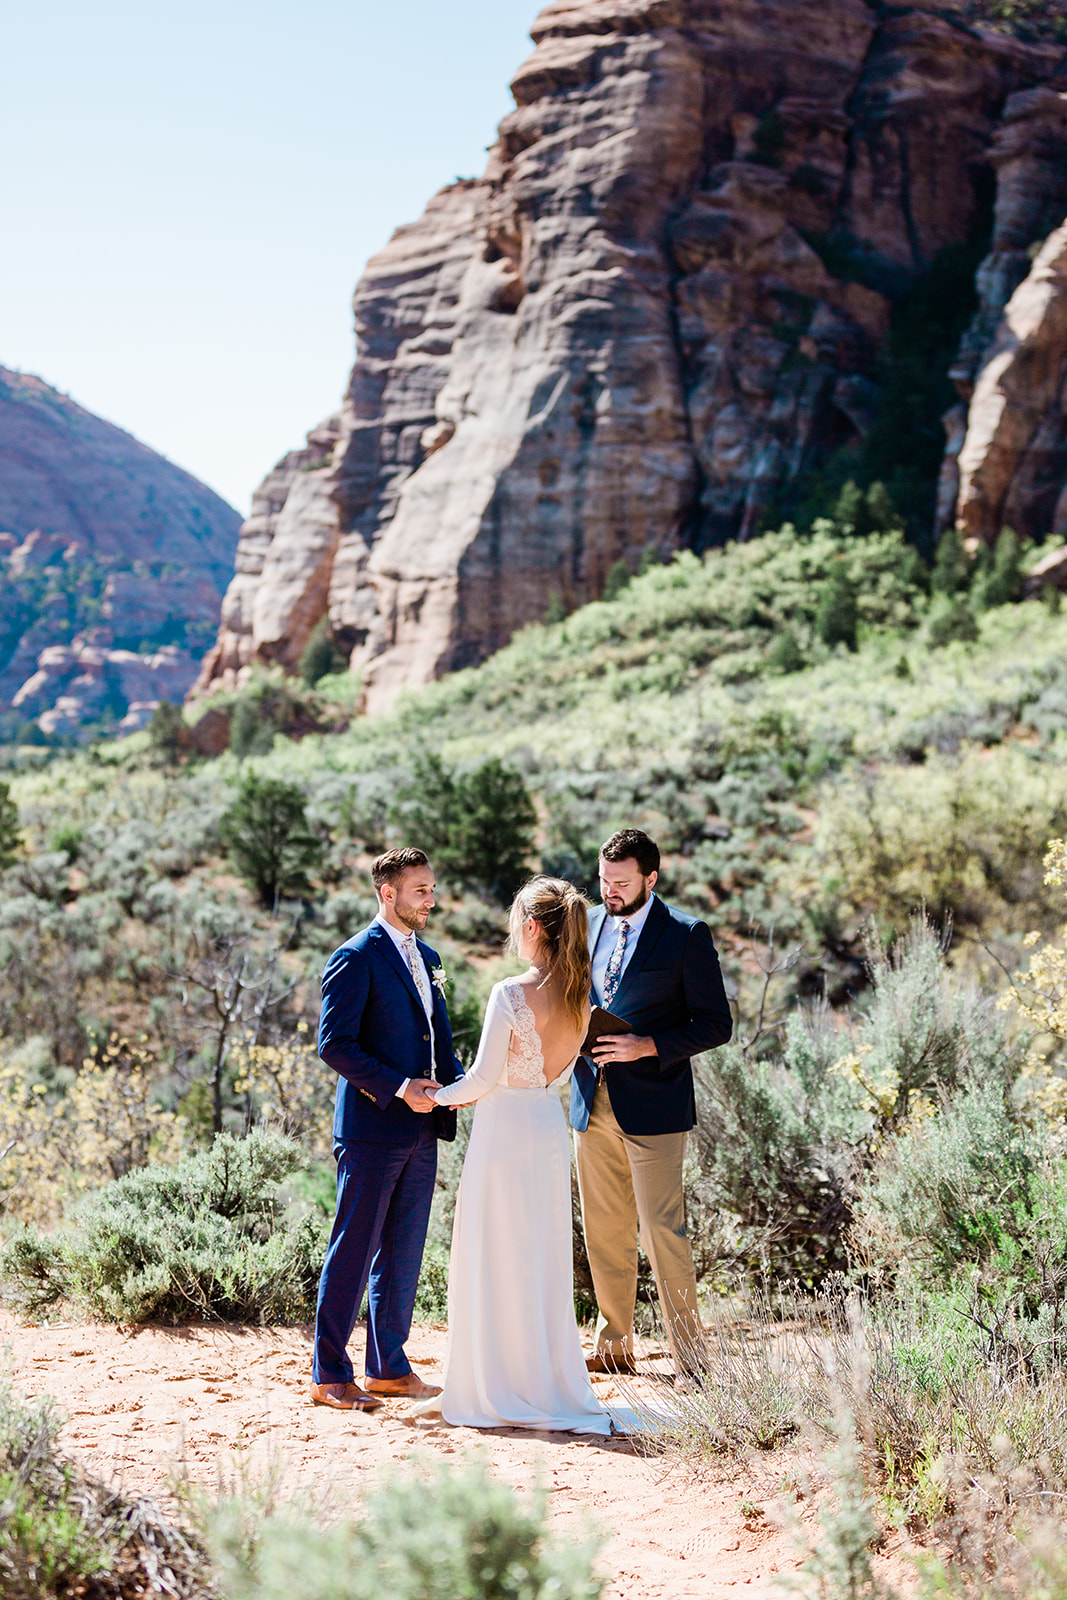 Nick and Kate's intimate Zion elopement